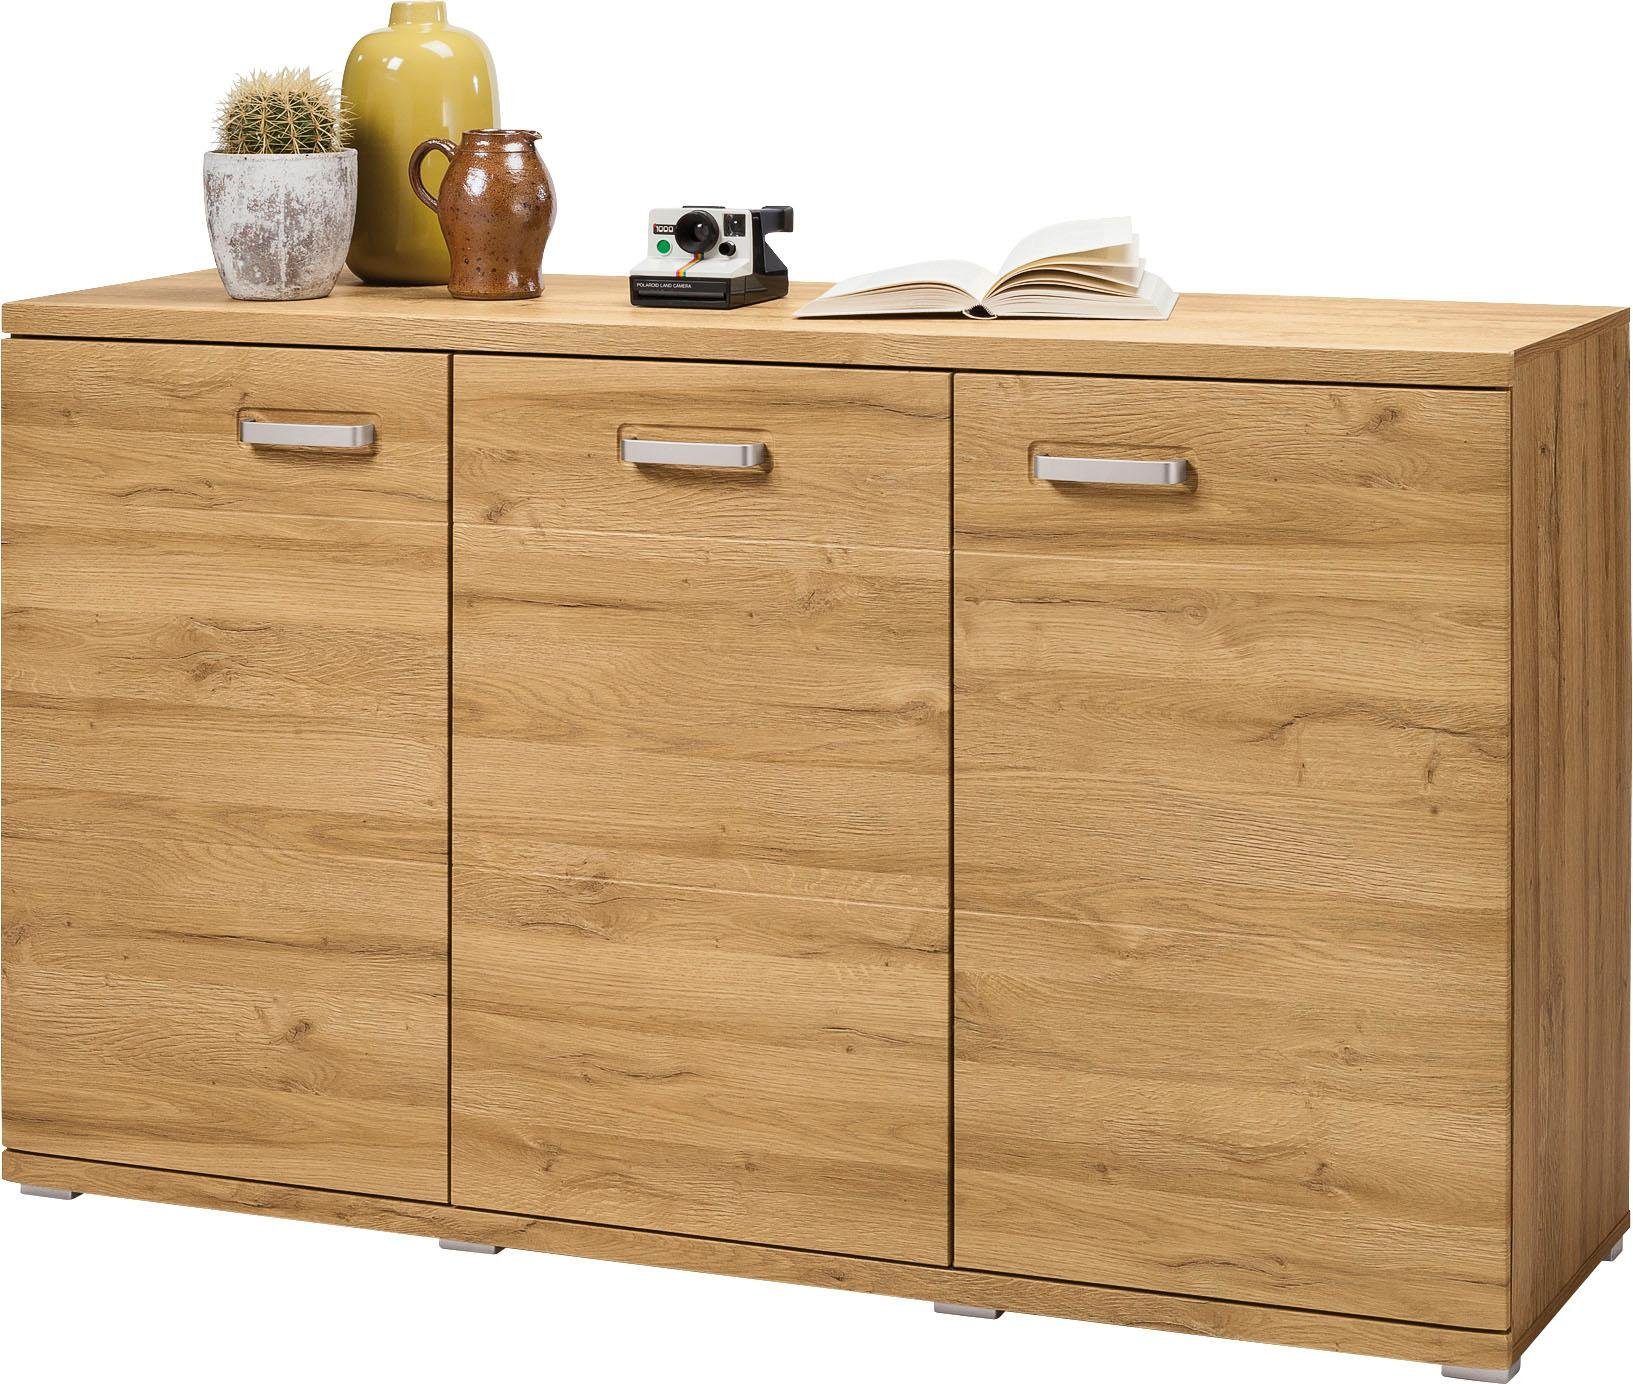 Boards, Sideboard 150 TV Store - Kaufen set Komnit Musterring by one Online One Breite Â»madisonÂ« Cm By Set Musterring